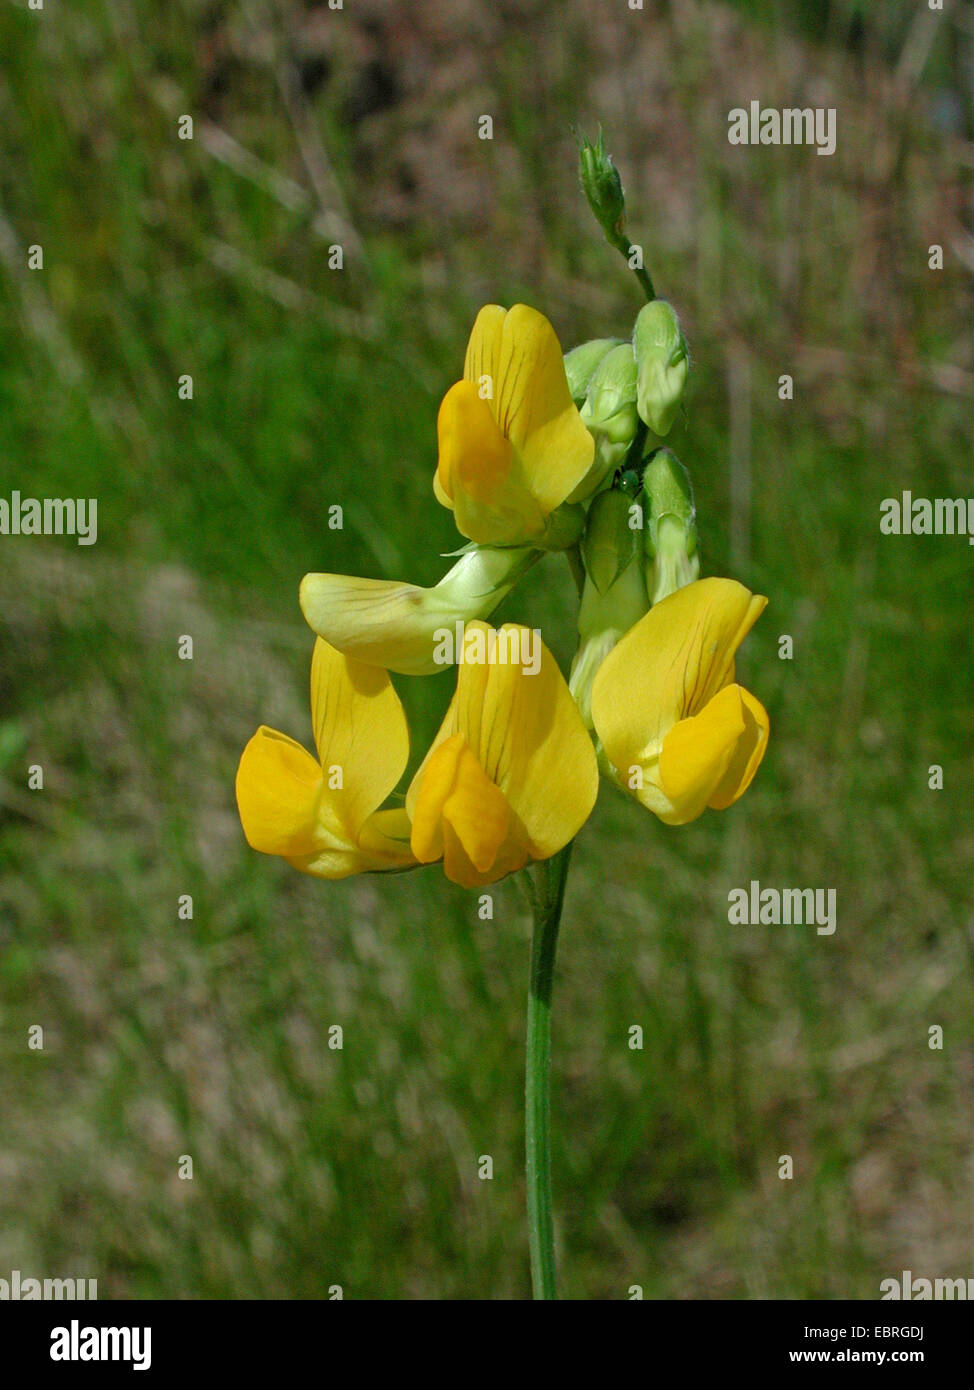 meadow peavine, meadow vetchling, yellow vetchling (Lathyrus pratensis), inflorescence, Germany Stock Photo